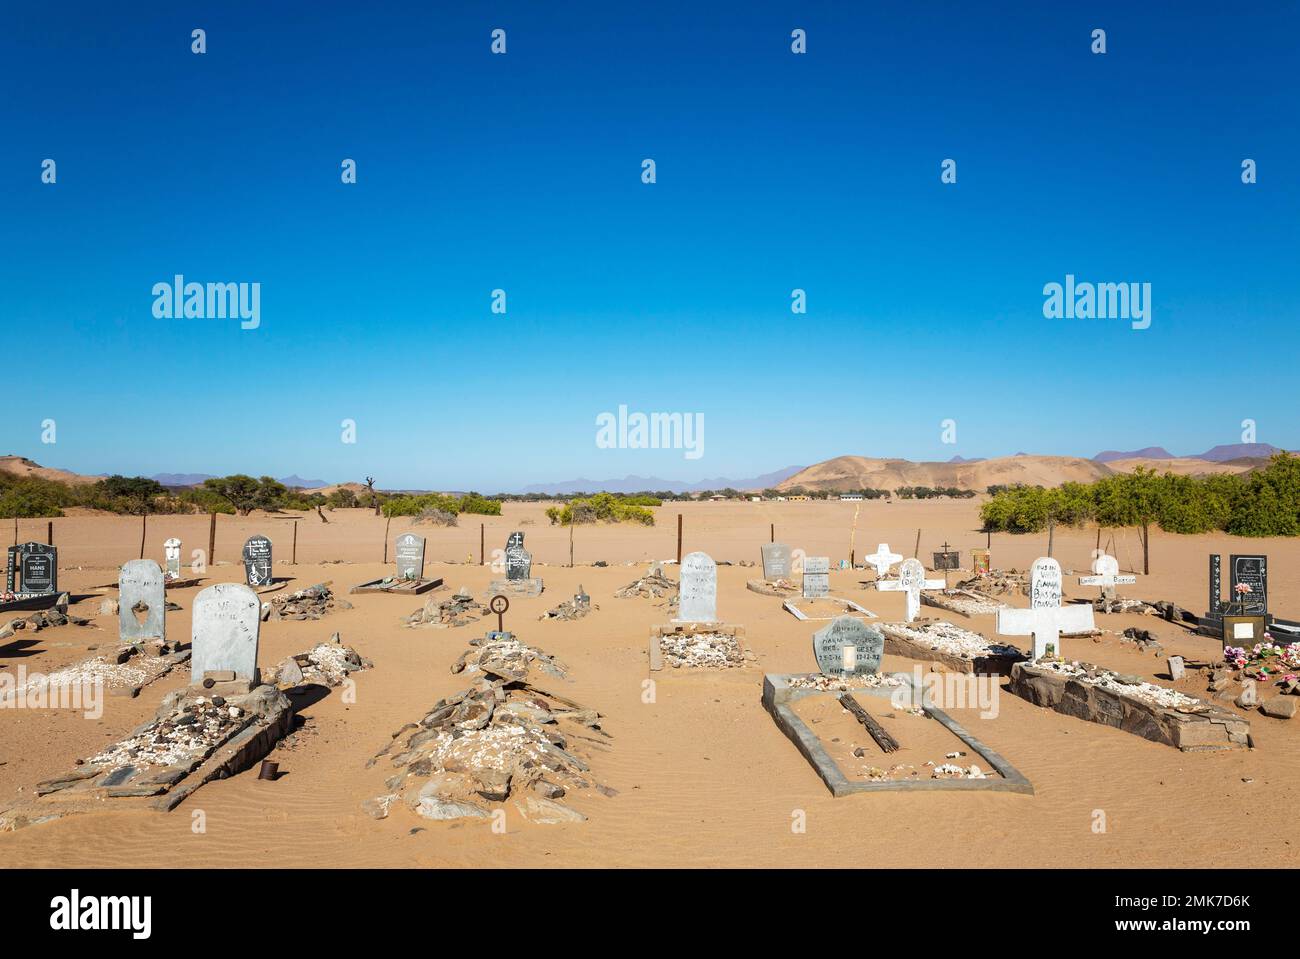 Cemetery at the remote De Riet settlement at the edge of the Aba-Huab river, Damaraland, Kunene Region, Namibia Stock Photo